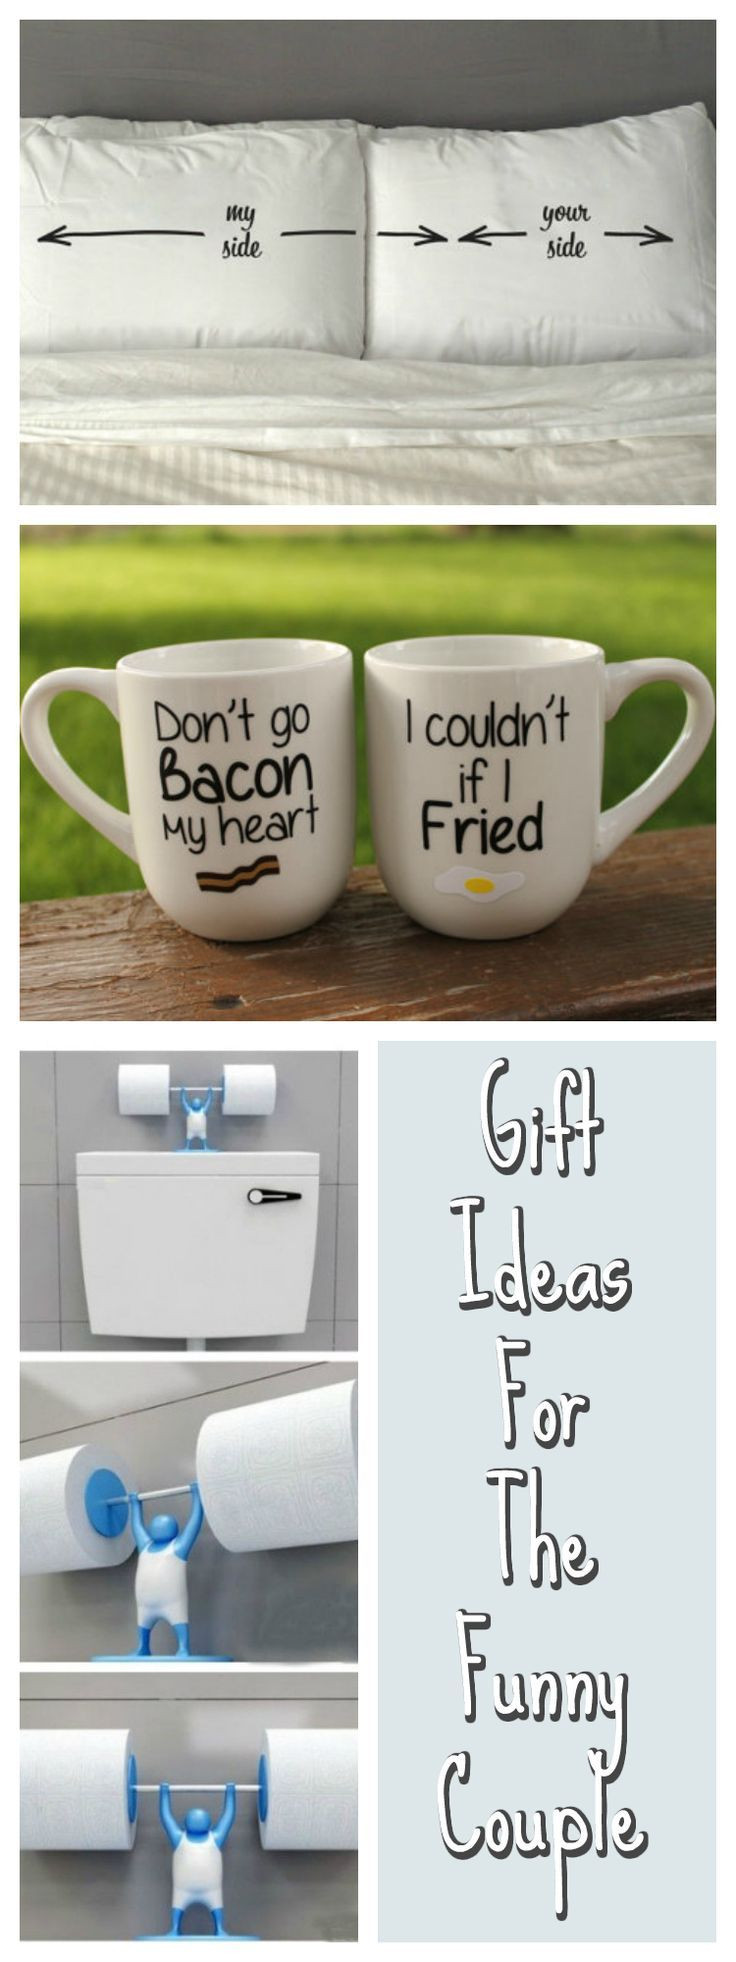 Funny Gift Ideas For Boyfriend
 Humorous t ideas for spouses that like to laugh These